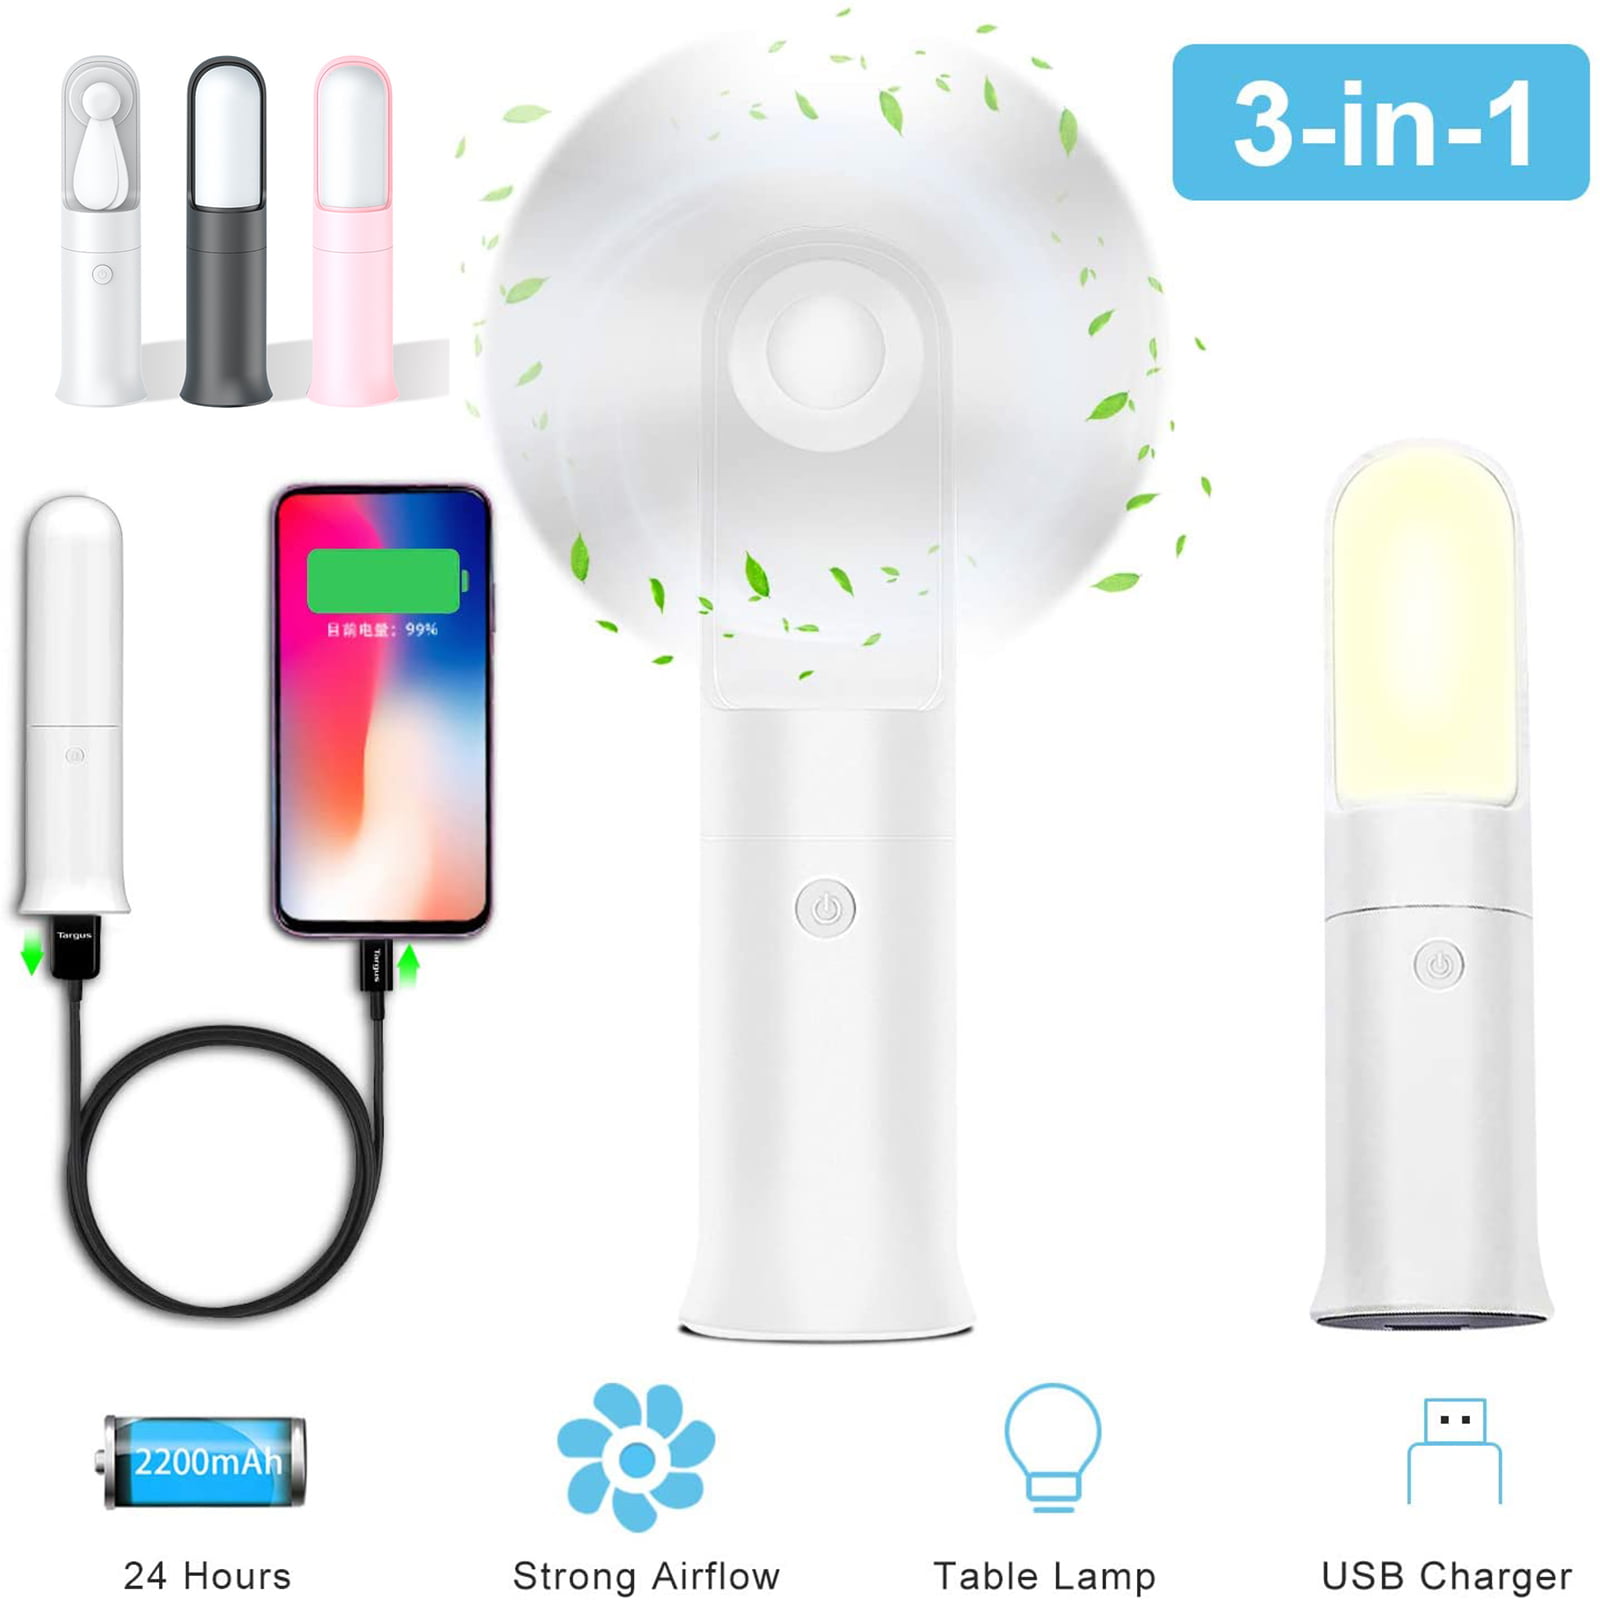 Outdoor Leisure JXILY Hand Held USB Fan Desk Portable Mini Creativity Personal Fan Electric Fast Charging Silent Suitable for Home Office Sleeping